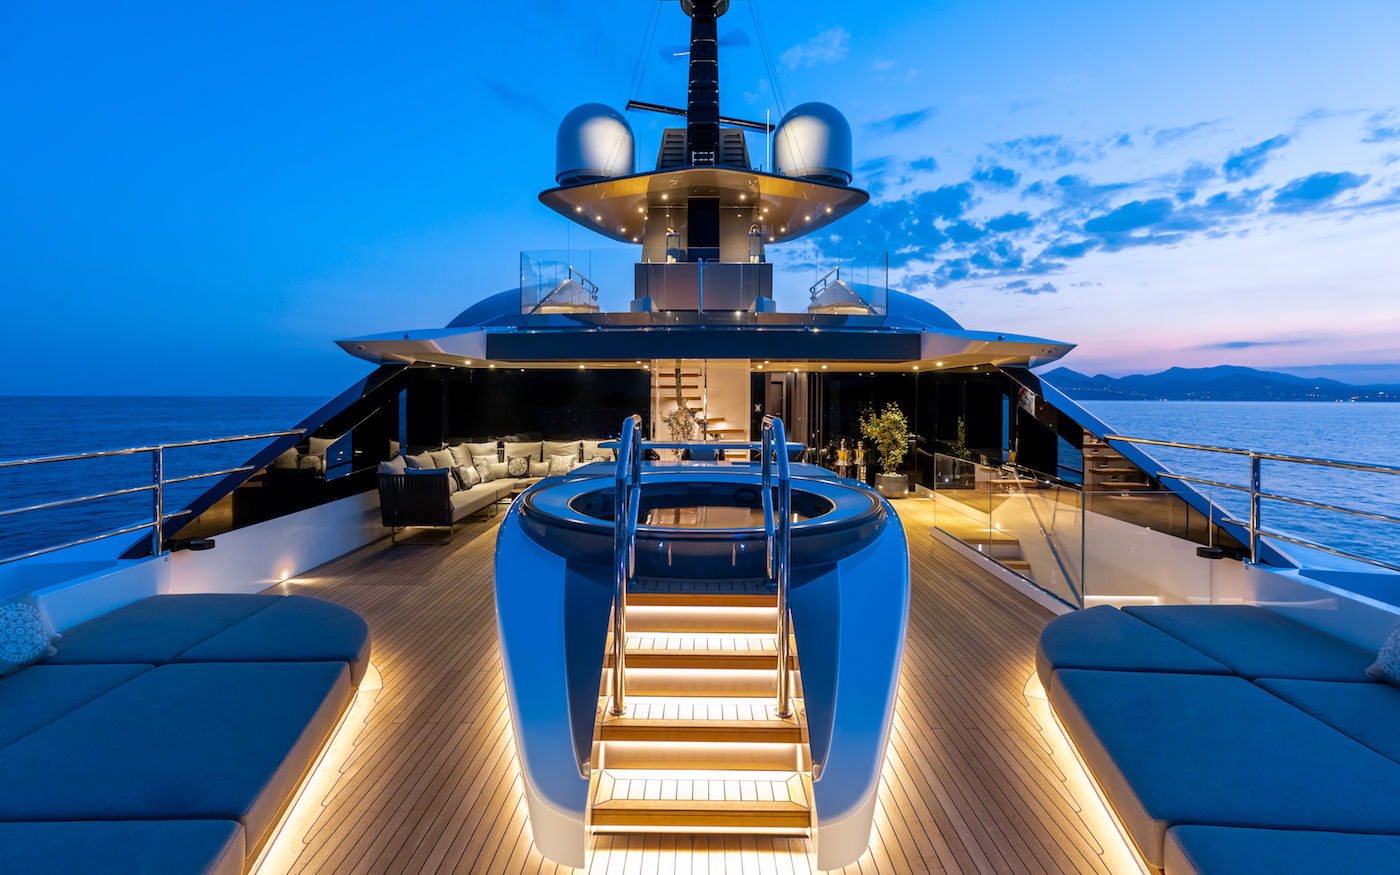 Owner Deck Jacuzzi By Night